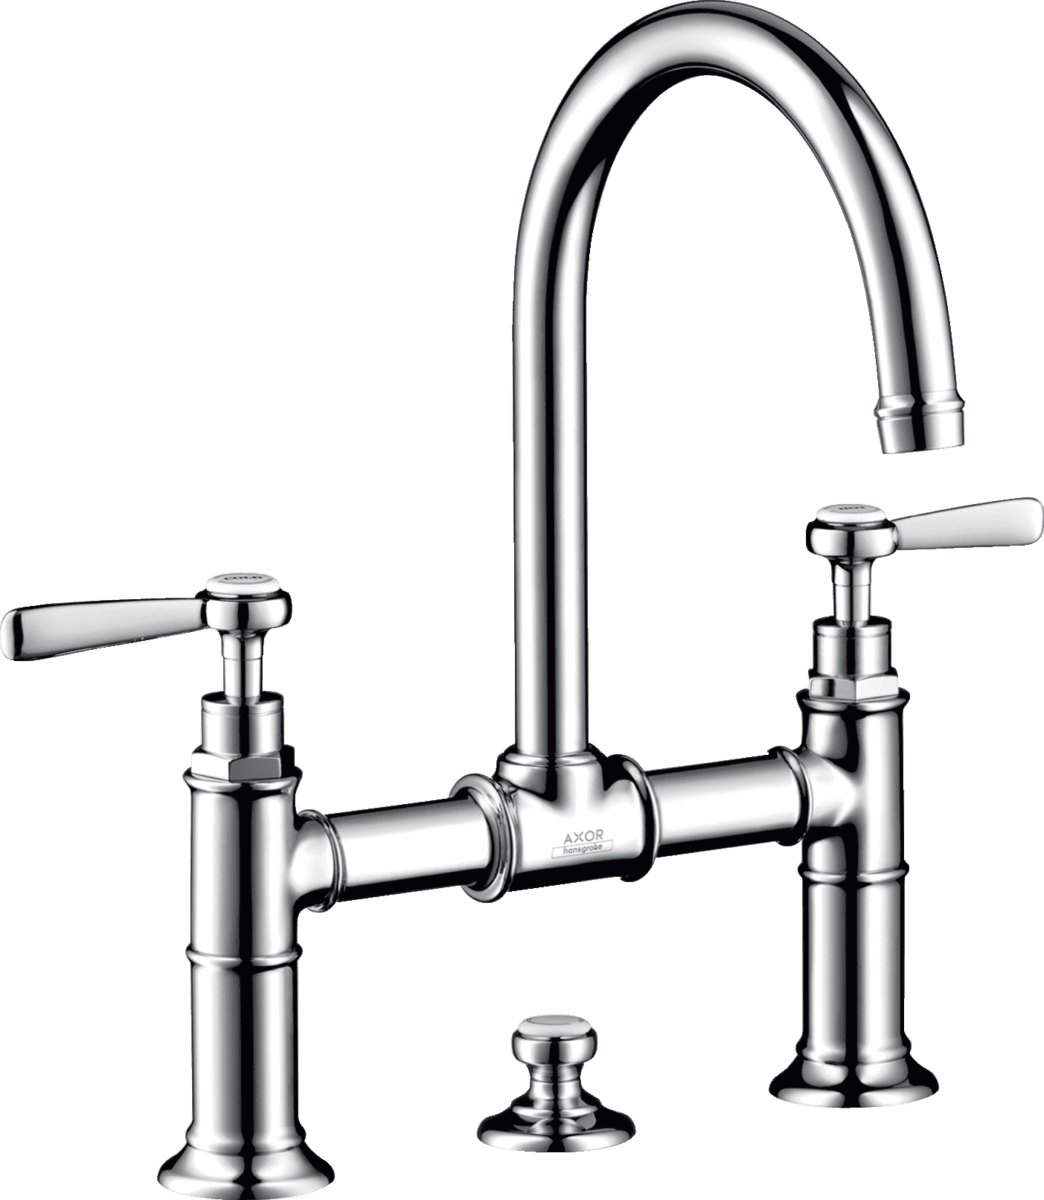 Picture of HANSGROHE AXOR Montreux 2-handle basin mixer 220 with lever handles and pop-up waste set #16511000 - Chrome